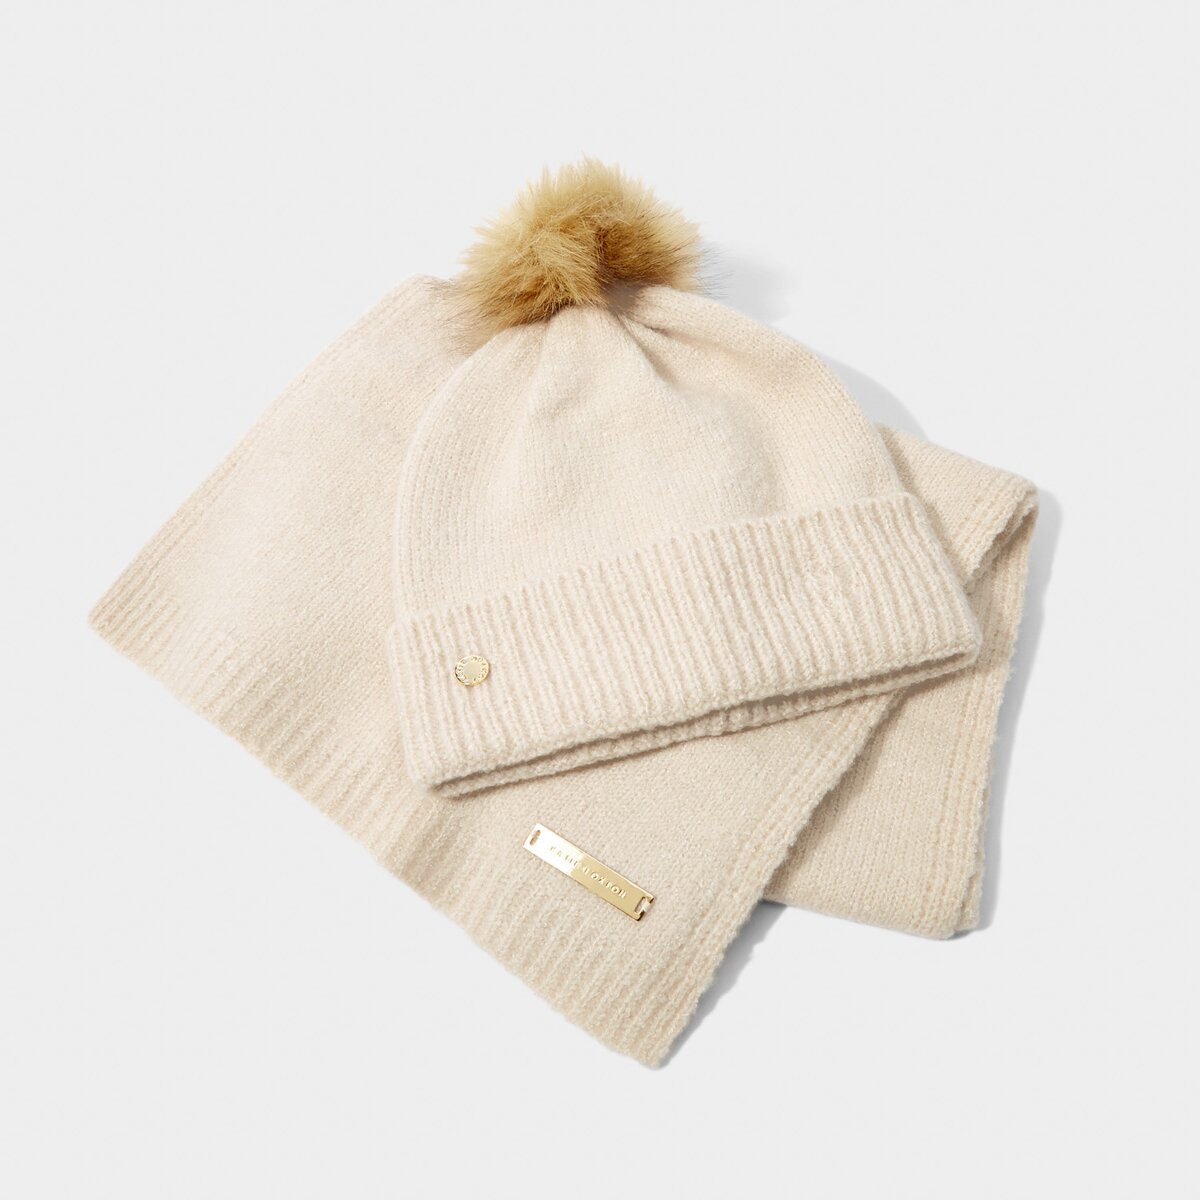 Knitted Hat and Scarf Set in Eggshell color. Available at Kadou.shop or in Store at 1900 Preston Rd 205, Plano, TX.